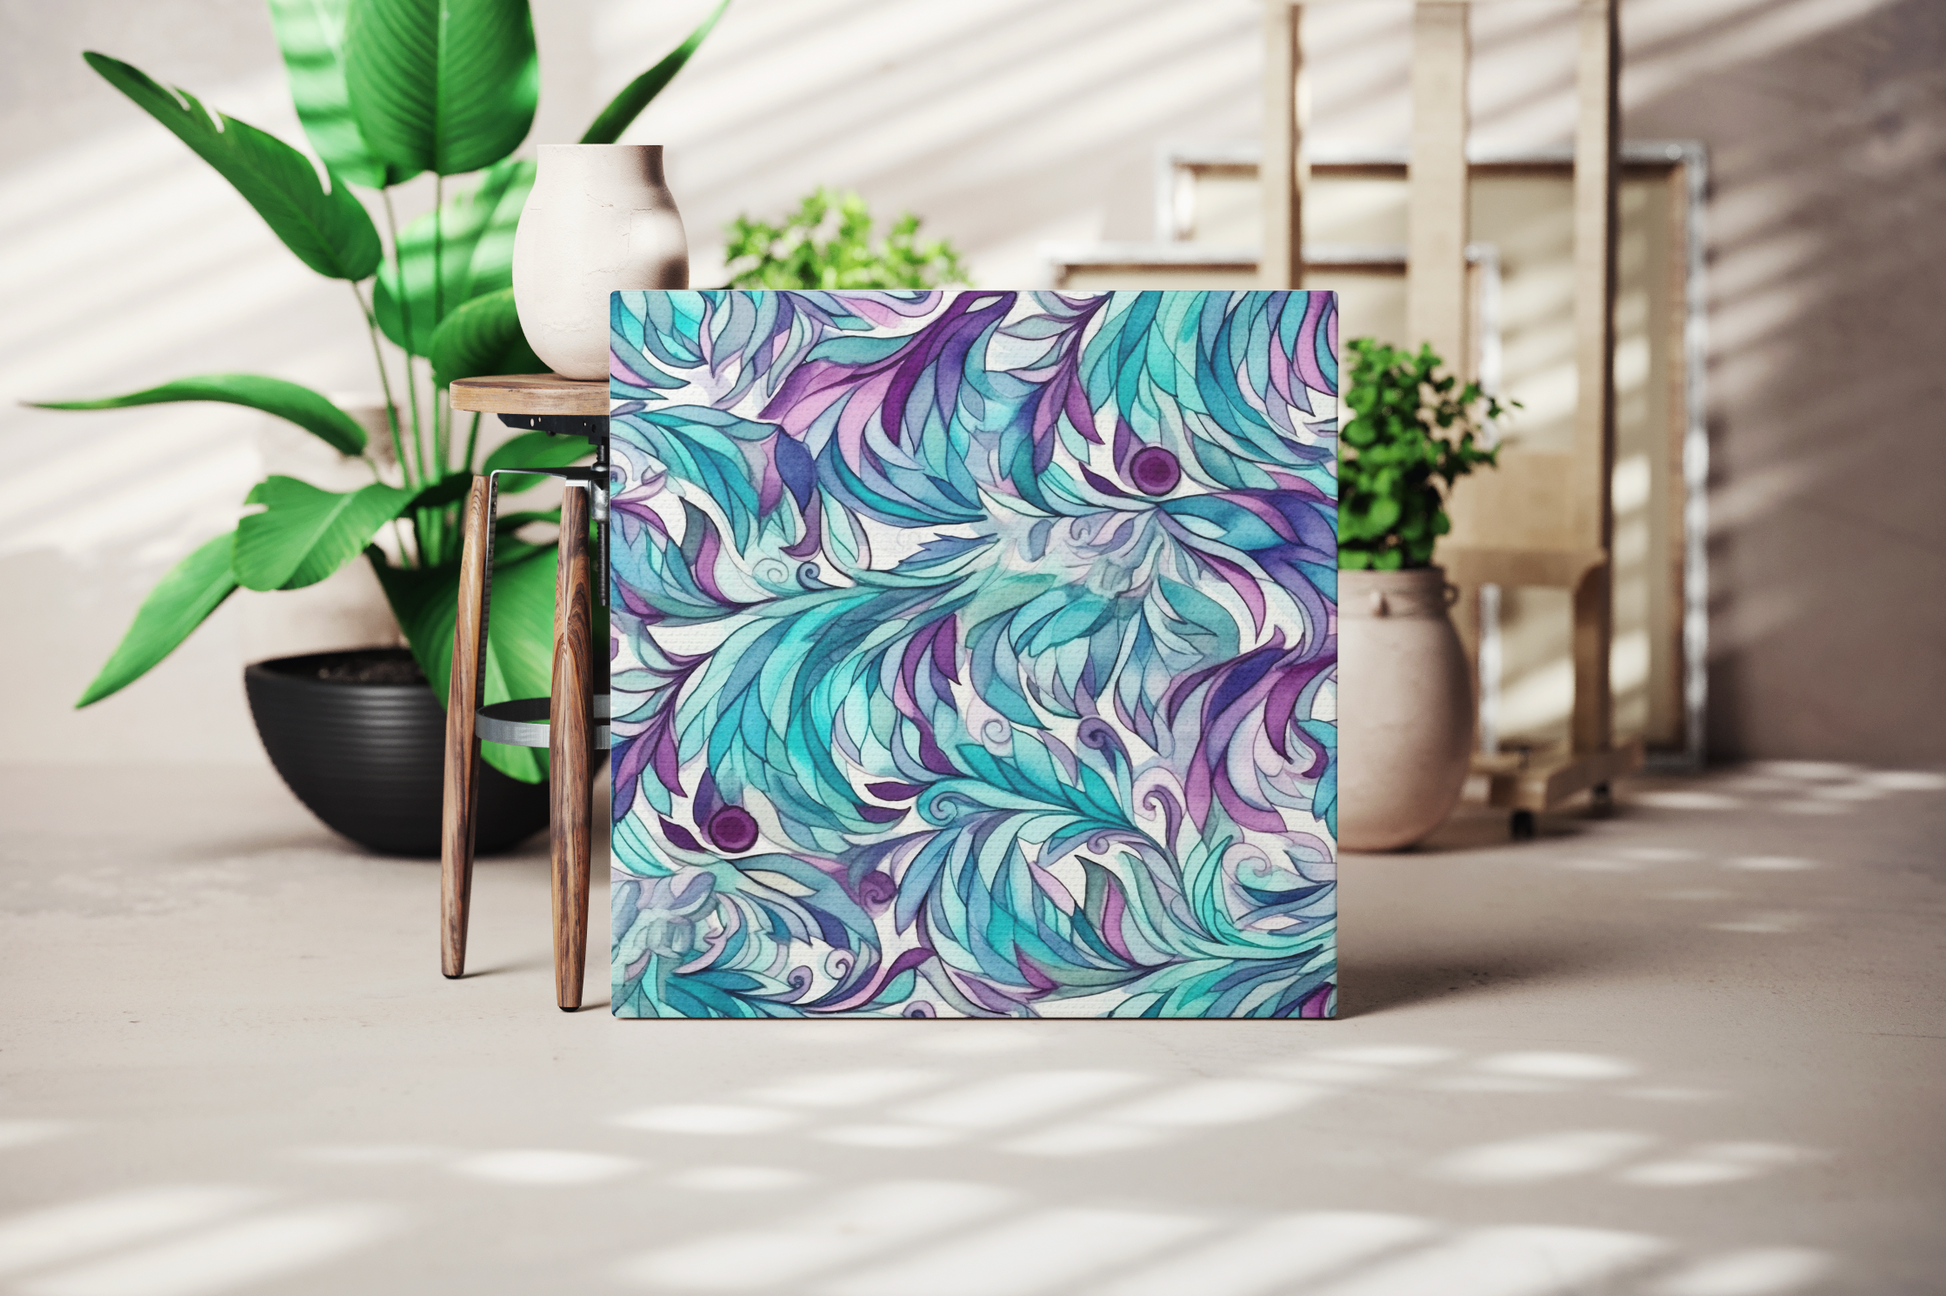 purple and blue fluid ink canvas, blue and purple alcohol canvas art, abstract floral canvas decor